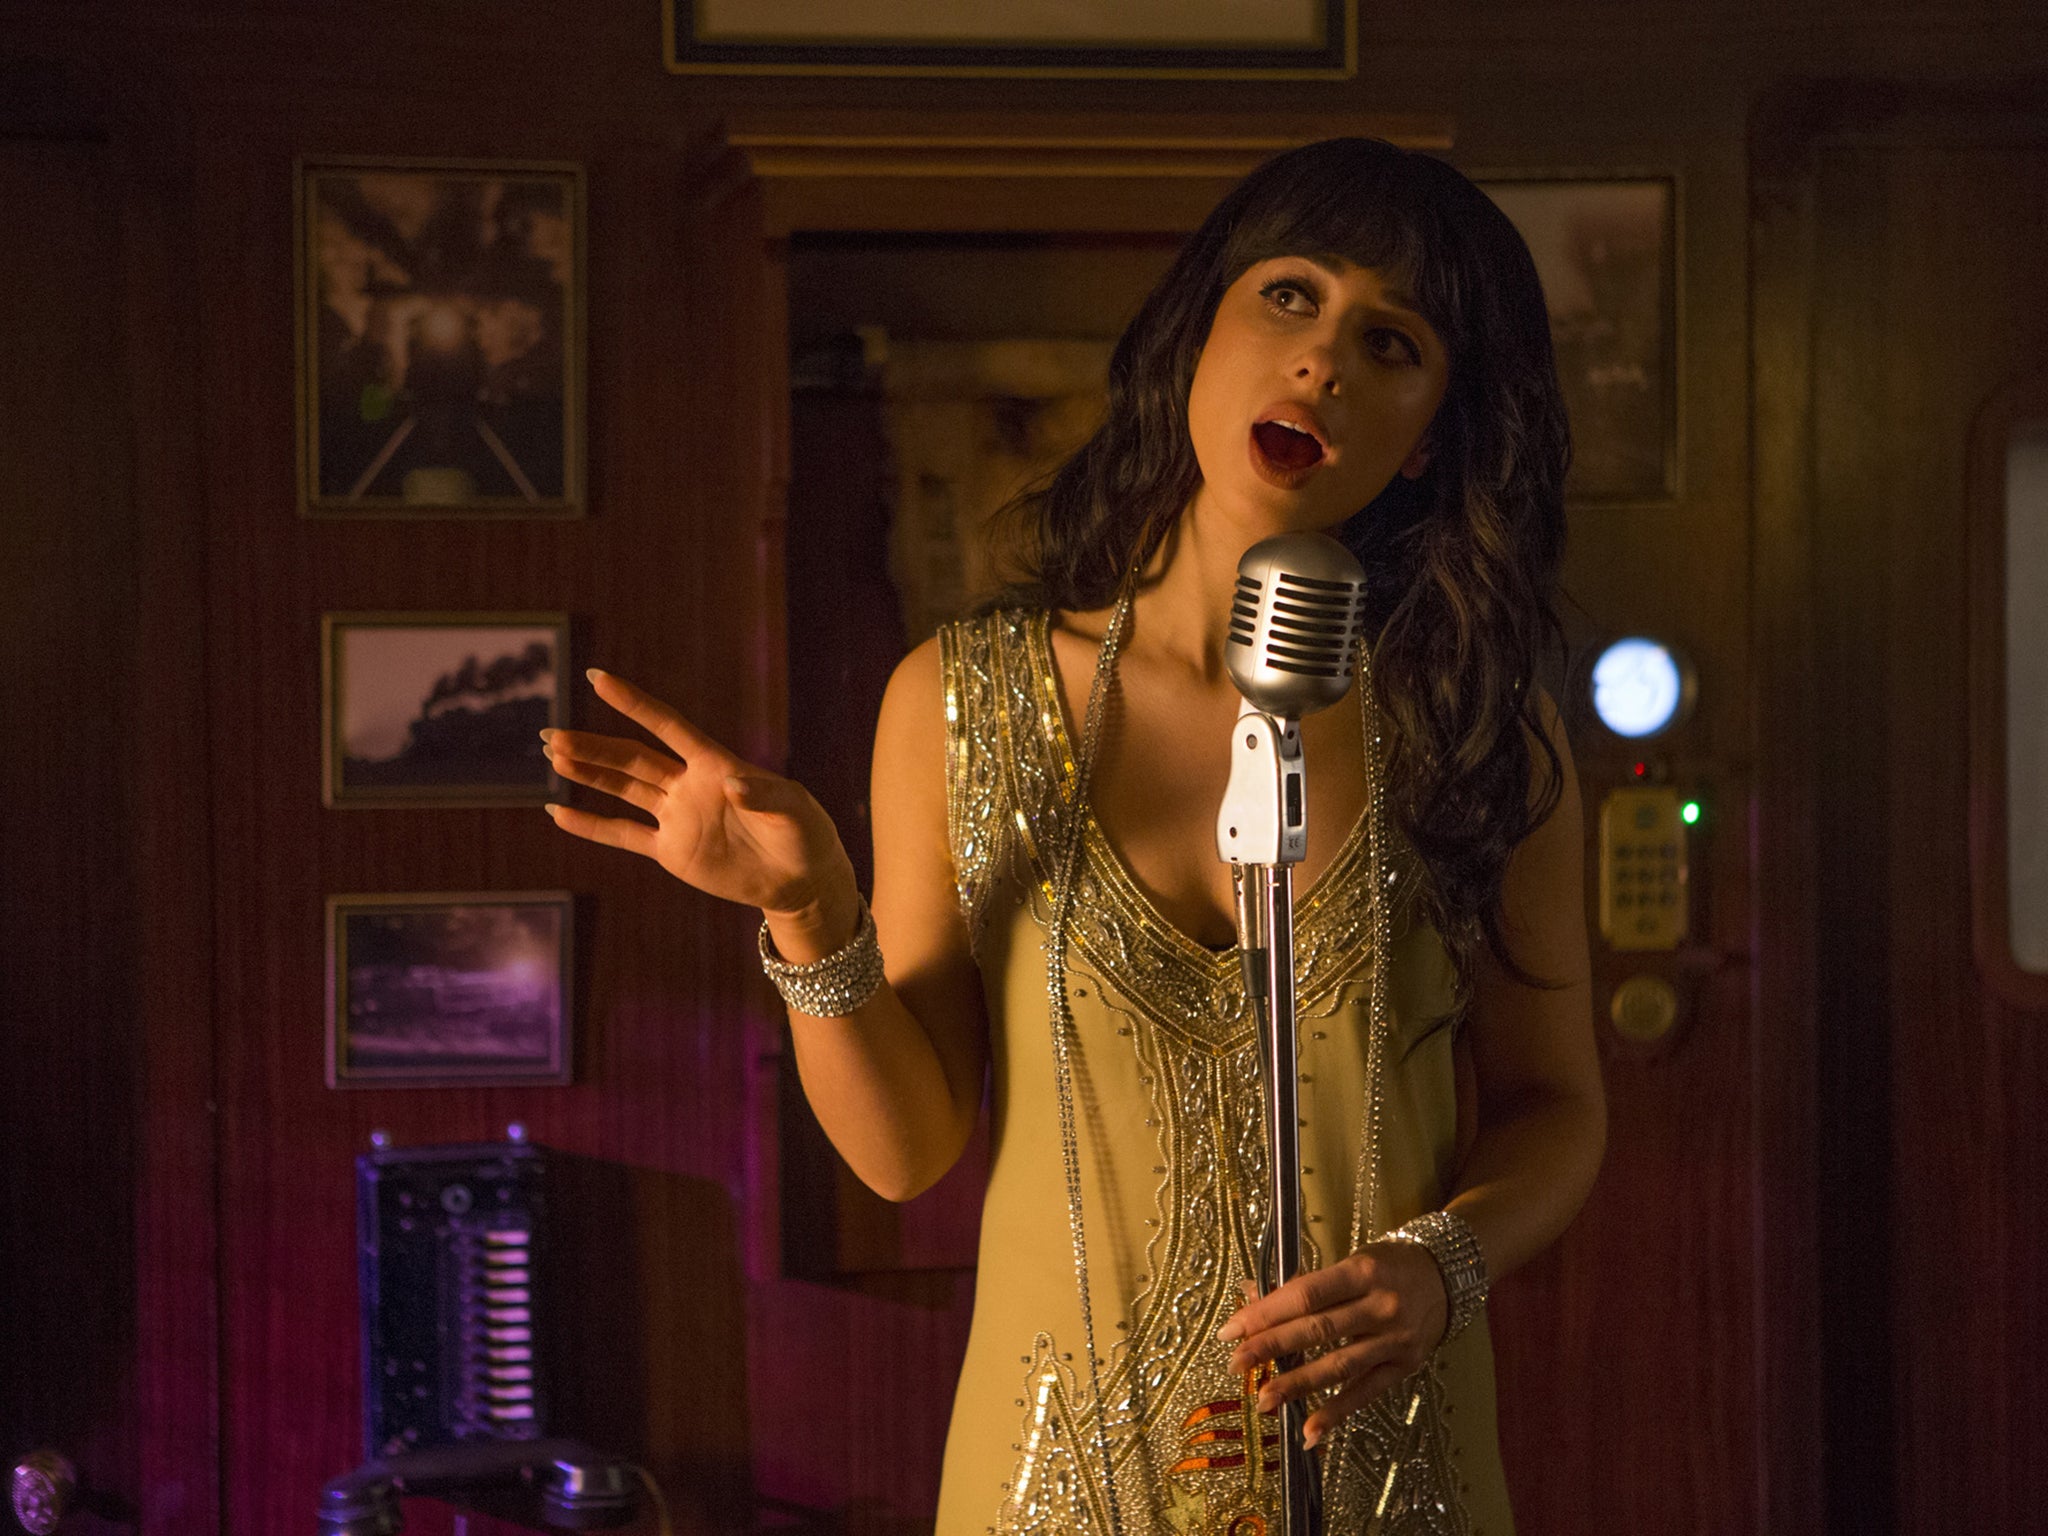 Singer Foxes makes a cameo in 'Mummy on the Orient Express'